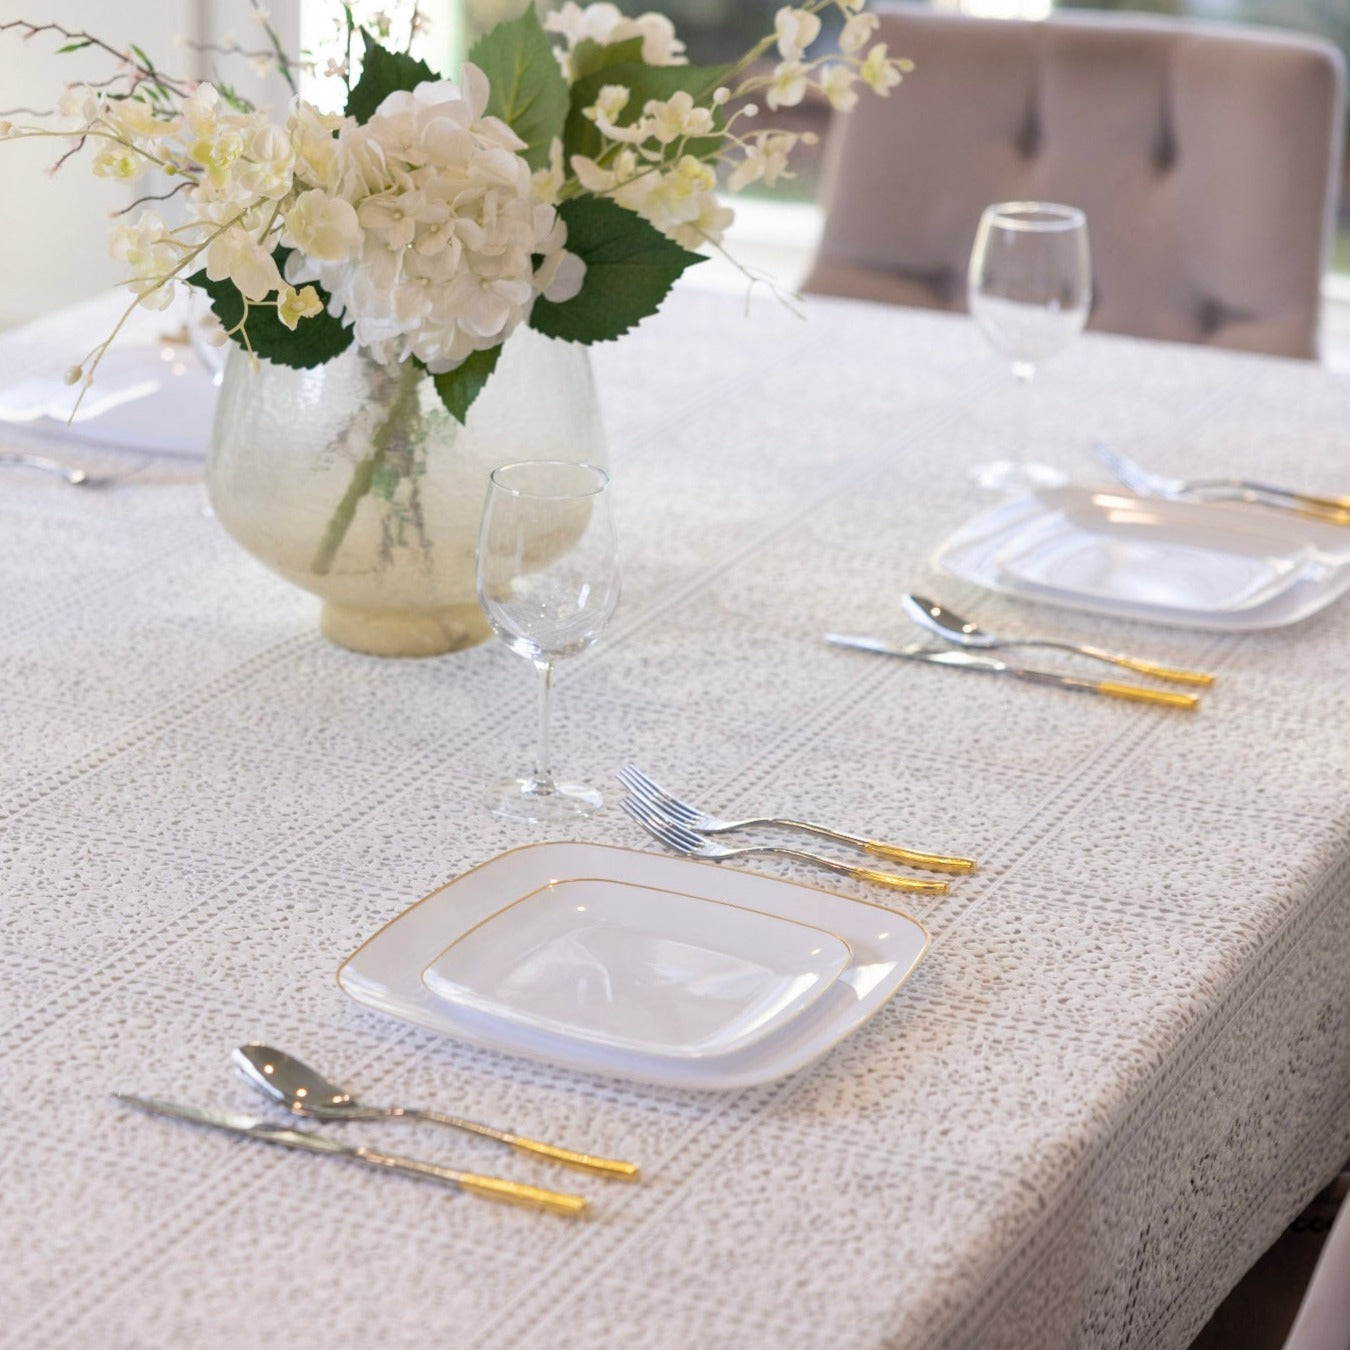 Viennese Lace Tablecloth